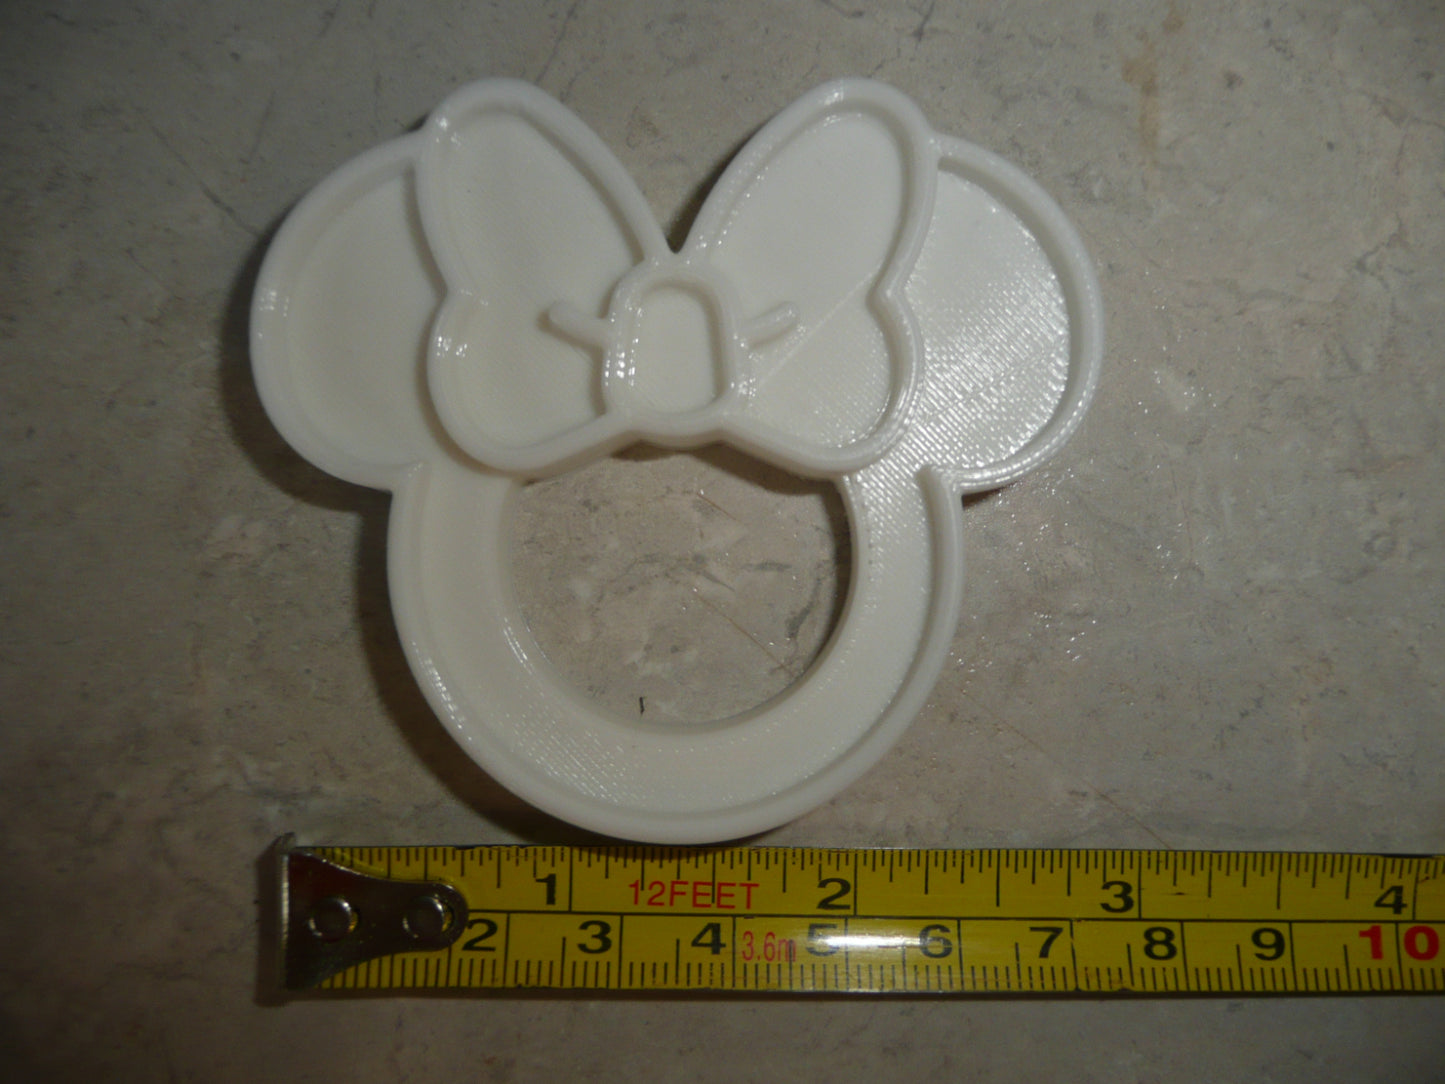 Minnie Mouse Themed White Napkin Ring Holders Set Of 4 Made In USA PR4813